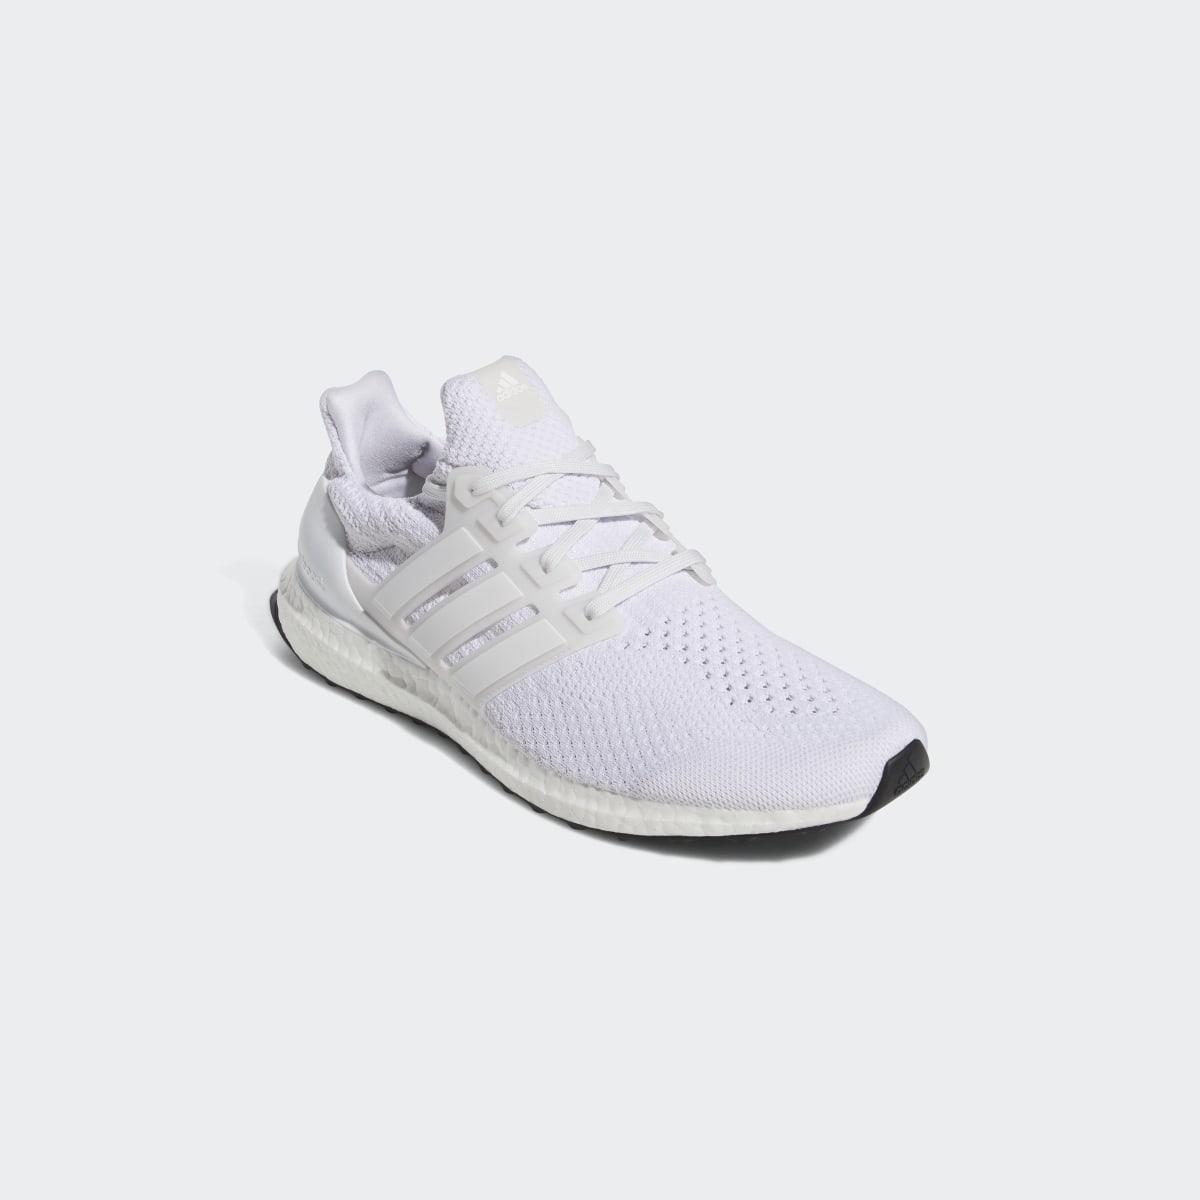 Adidas Ultraboost 5 DNA Running Lifestyle Shoes. 6